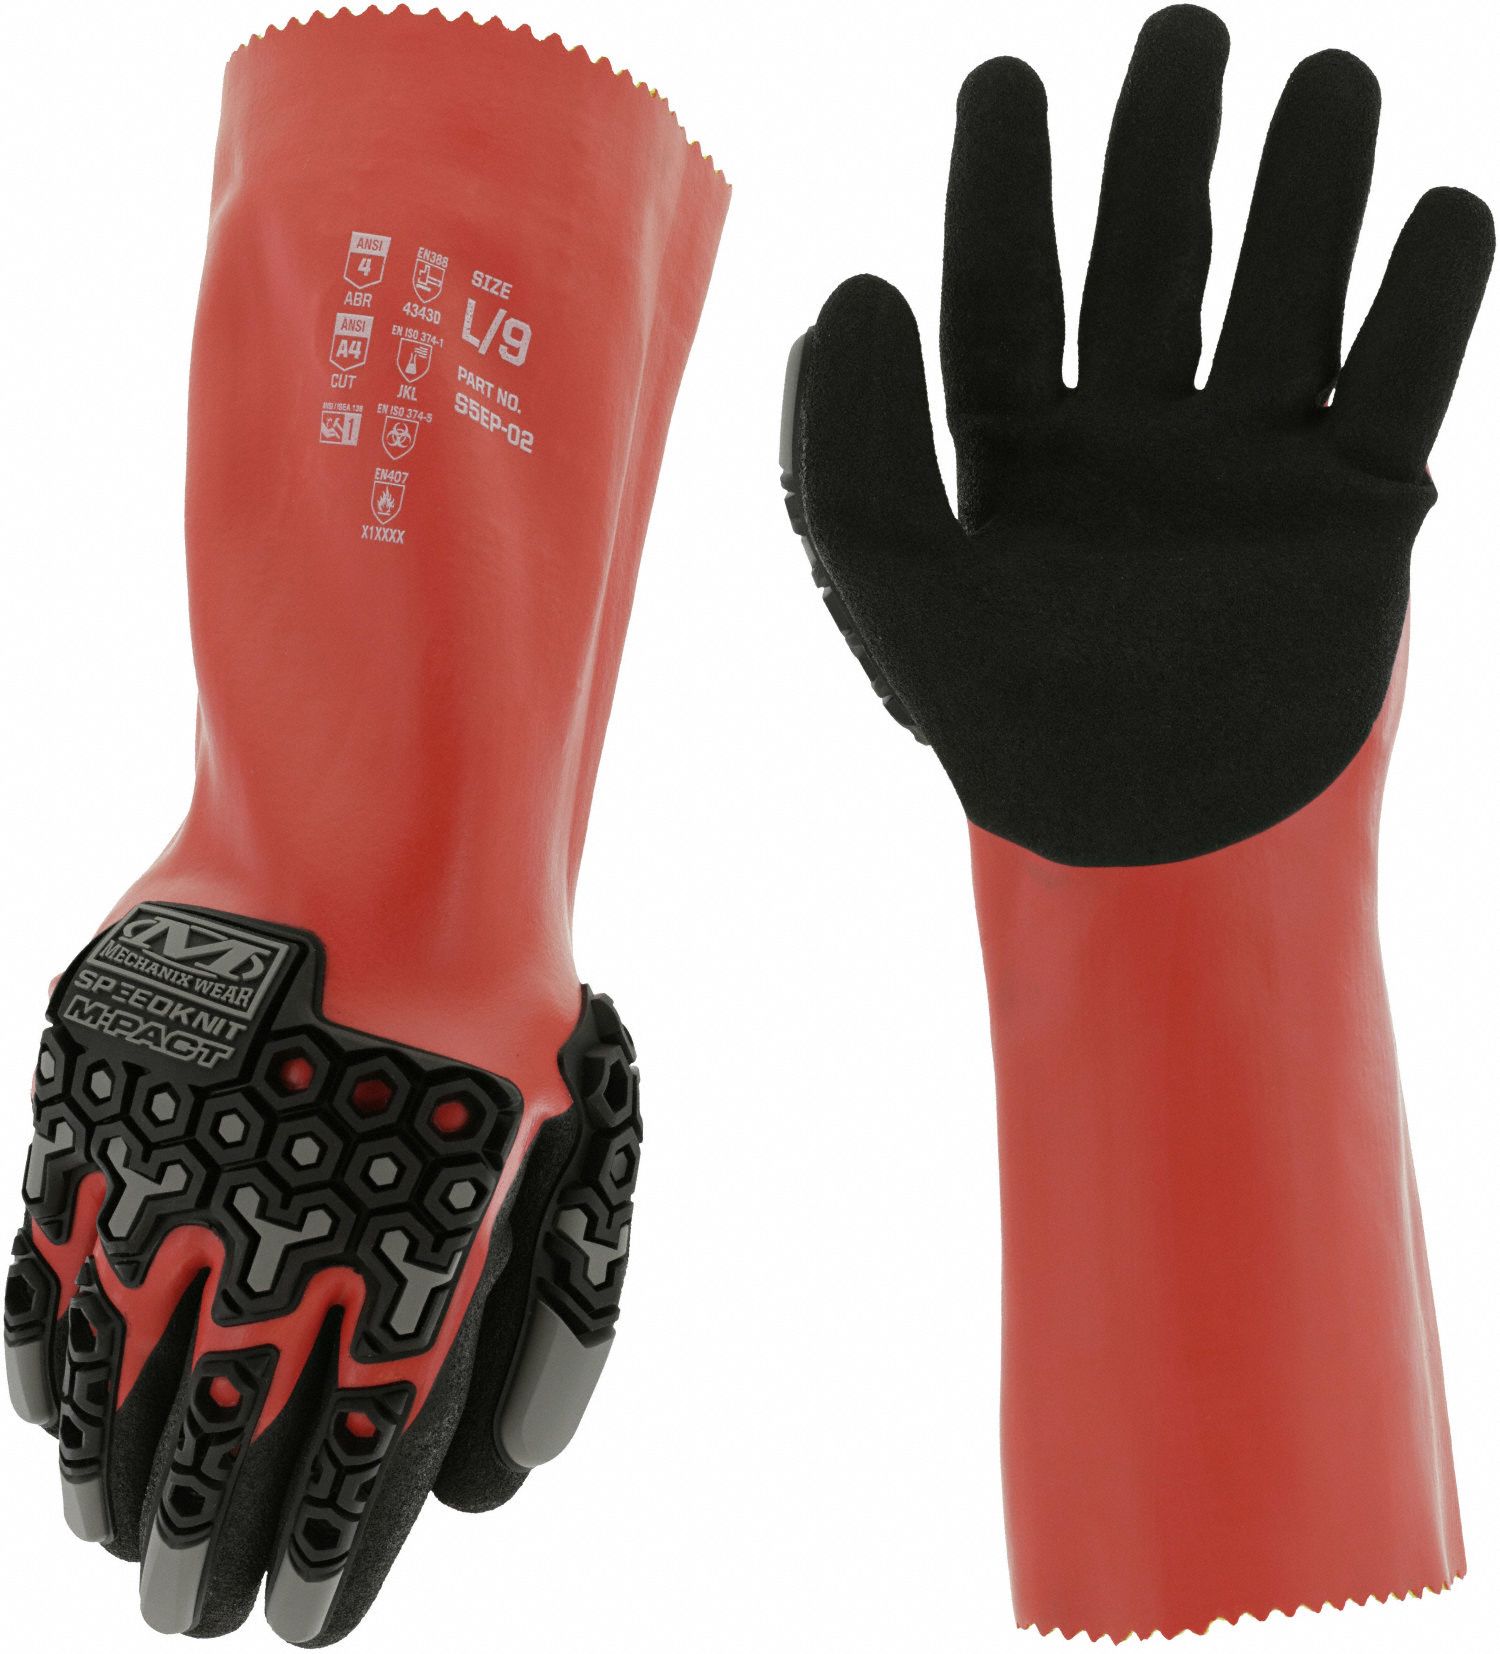 MECHANIX WEAR CHEMICAL GLOVES, S, RED, 14 IN LONG, 18 GA THICK, GLASS/HPPE/NITRILE  - Chemical- & Cut-Resistant Gloves - MWXS5EP02007